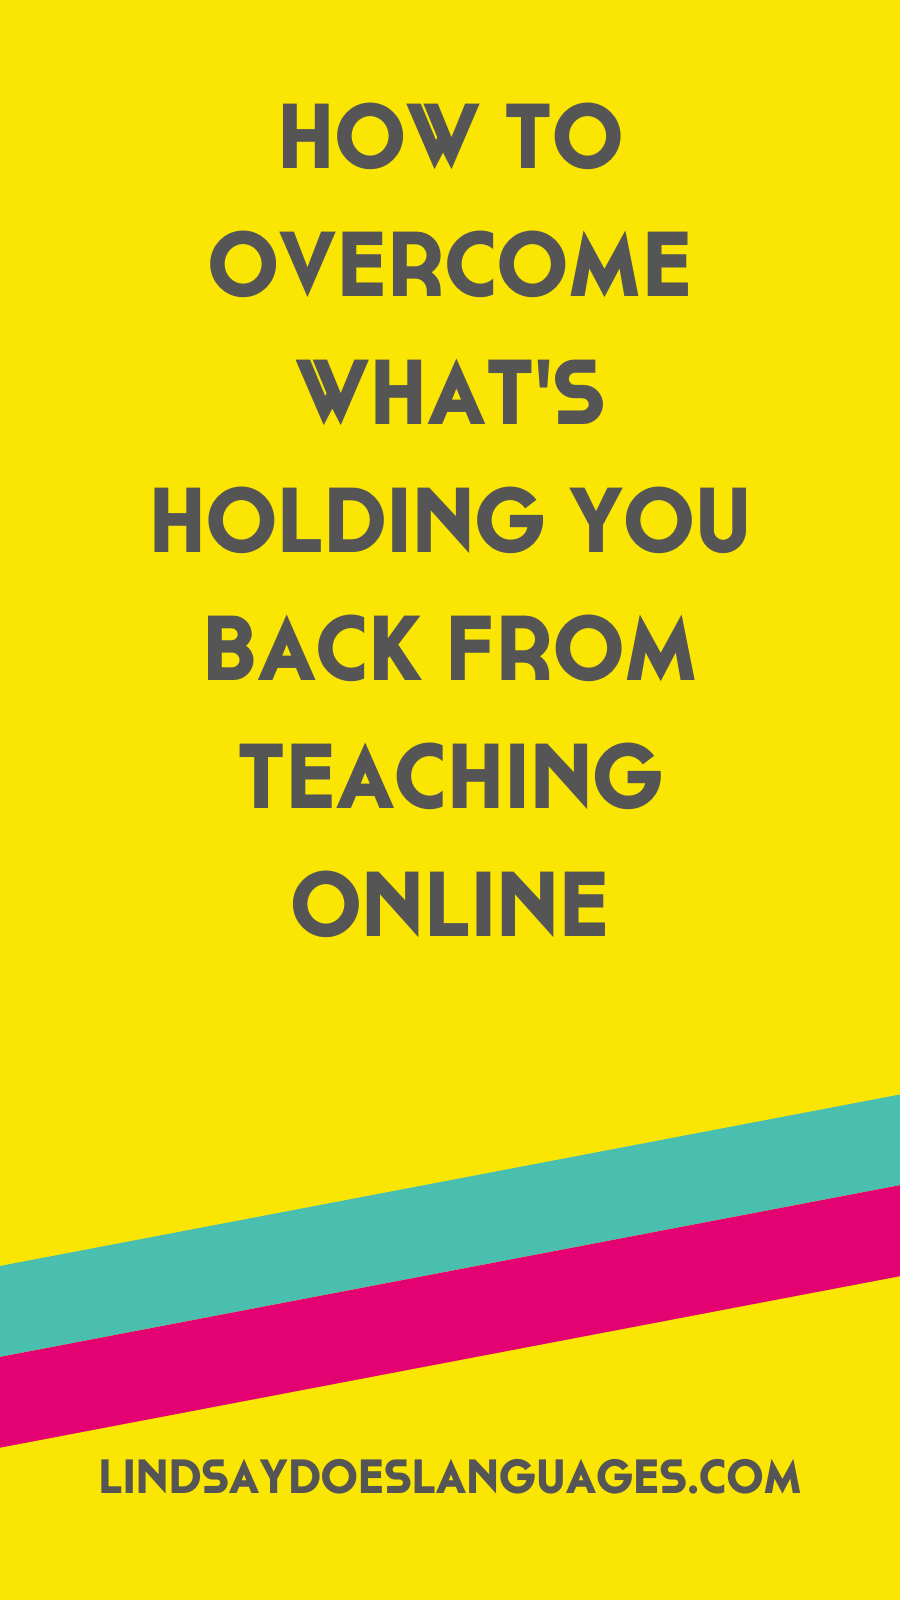 Curious how to overcome what's holding you back from teaching online? Read this to find out how to overcome your teaching online worries.